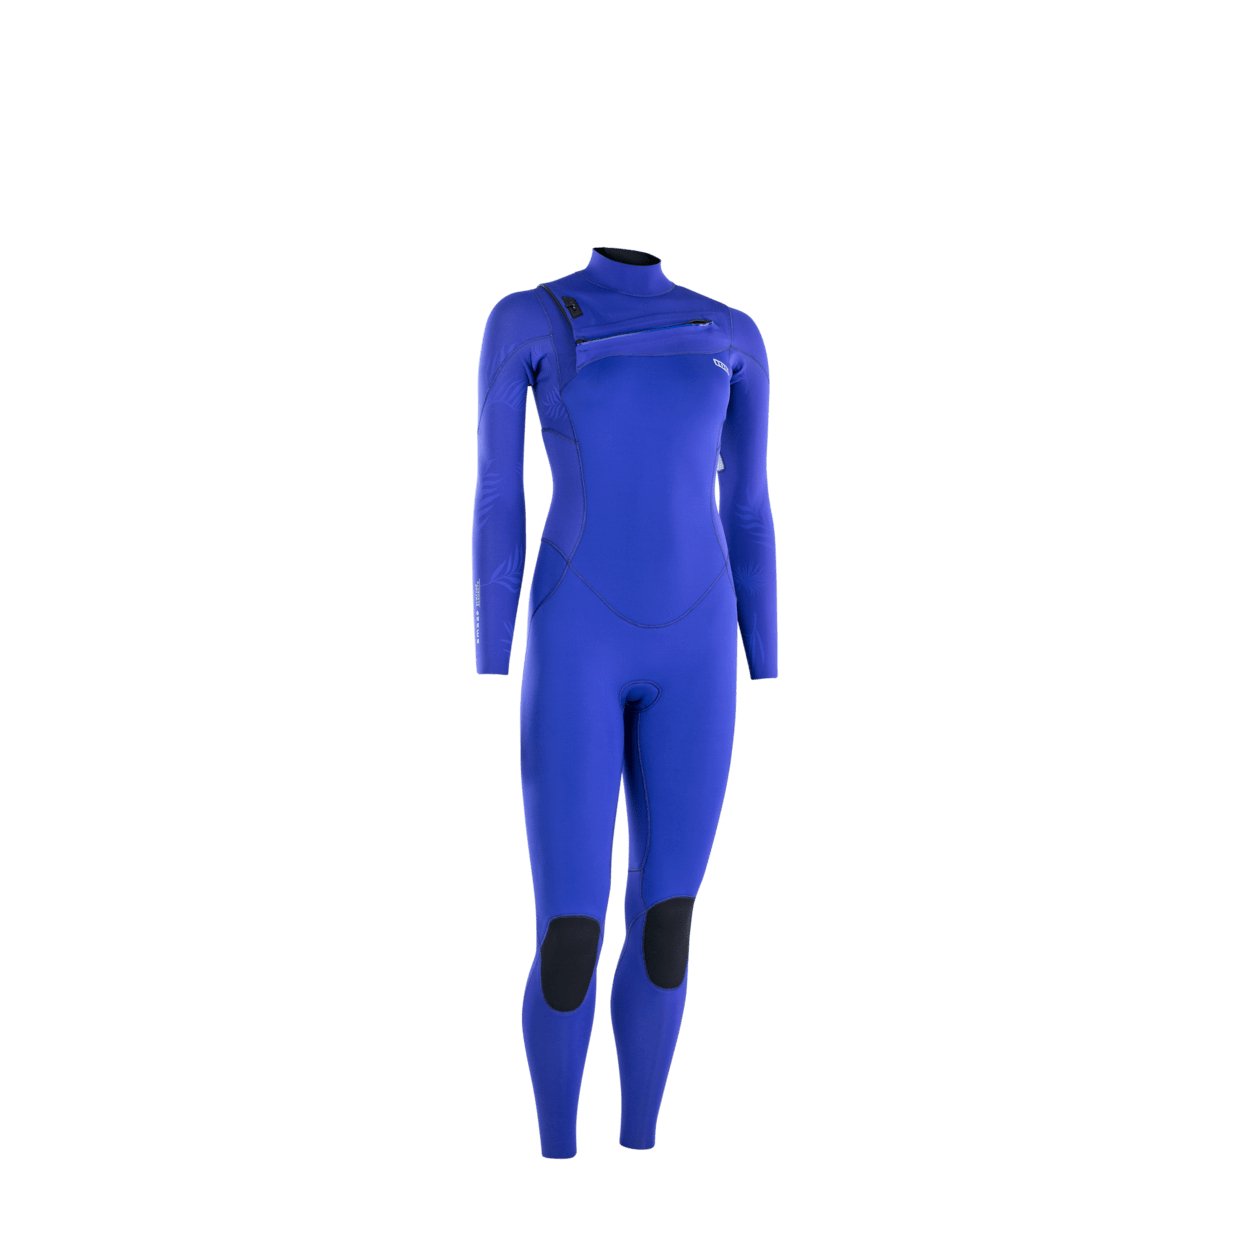 ION Amaze Core 5/4 Front Zip 2022 - Worthing Watersports - 9010583057989 - Wetsuits - ION Water